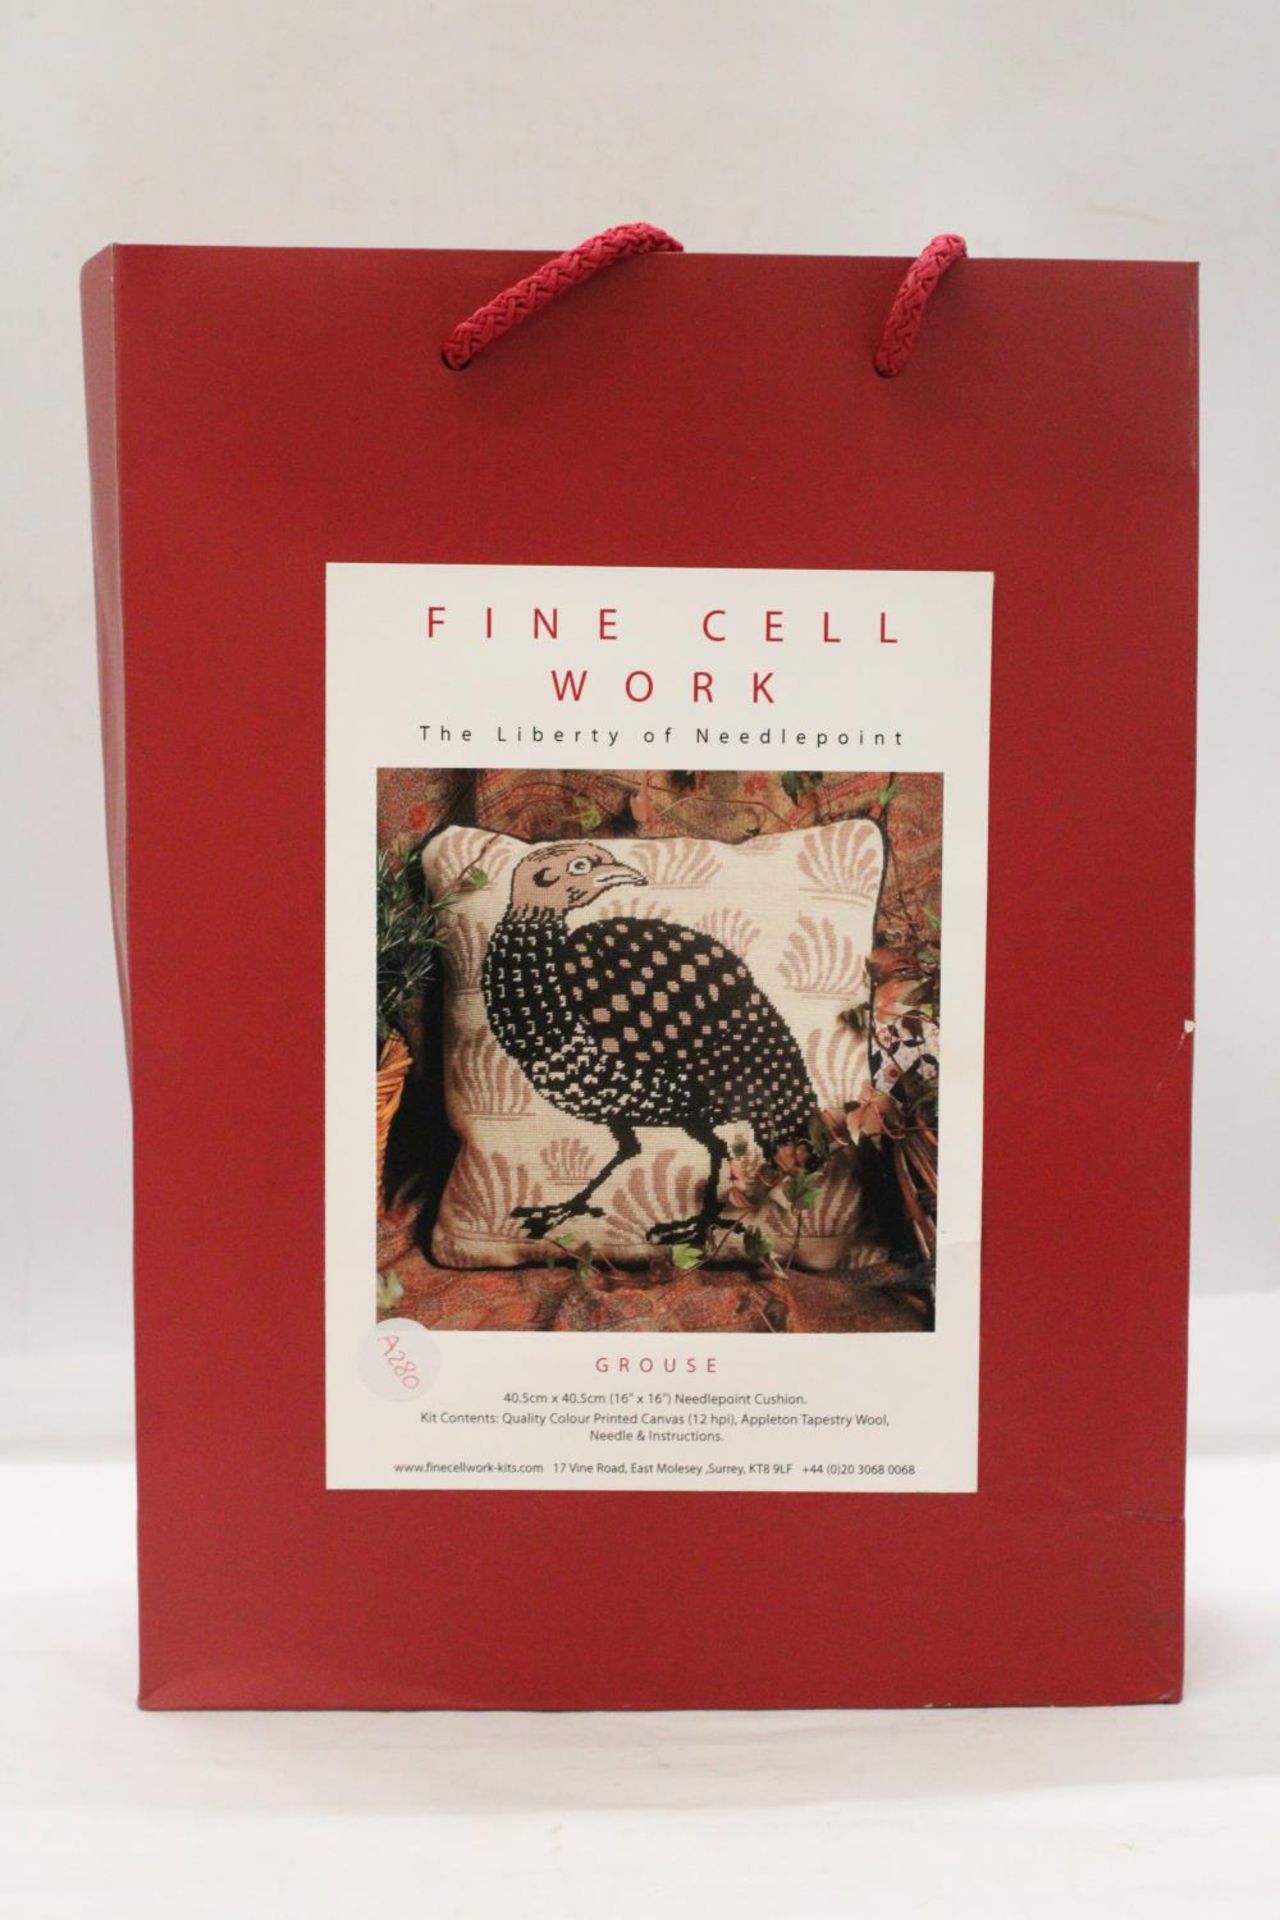 A FINE CELL WORK "THE LIBERTY OF NEEDLEPOINT", "GROUSE", NEEDLEPOINT CUSHION KIT